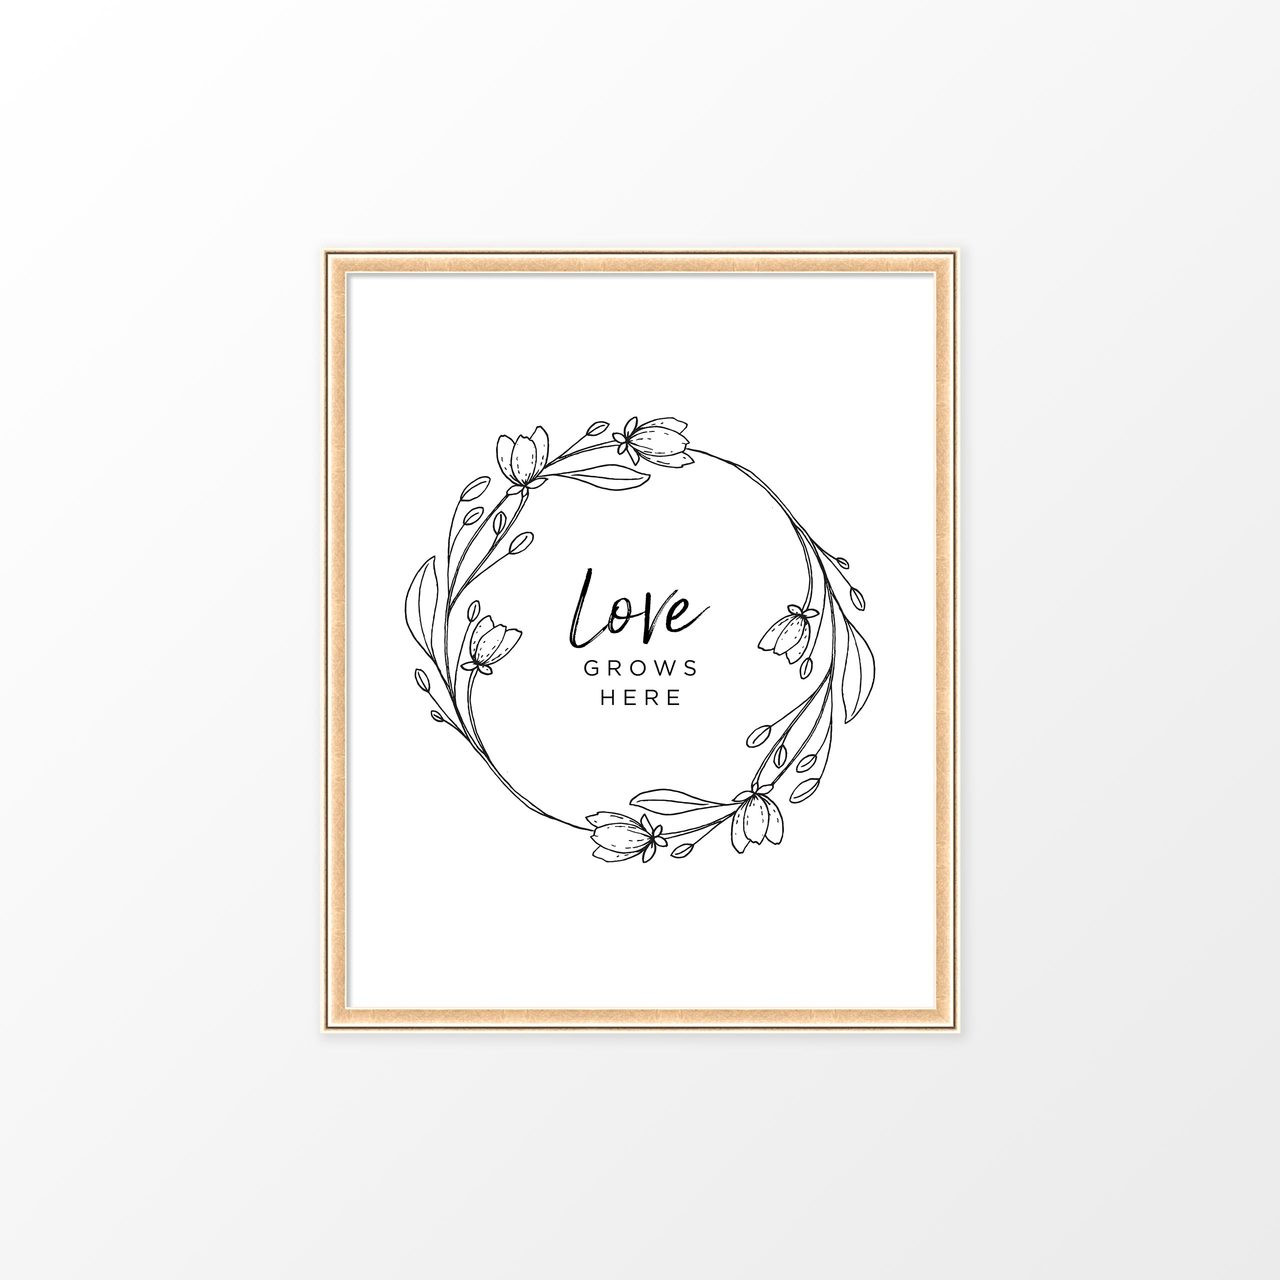 'Love Grows Here' Art Print from The Printed Home